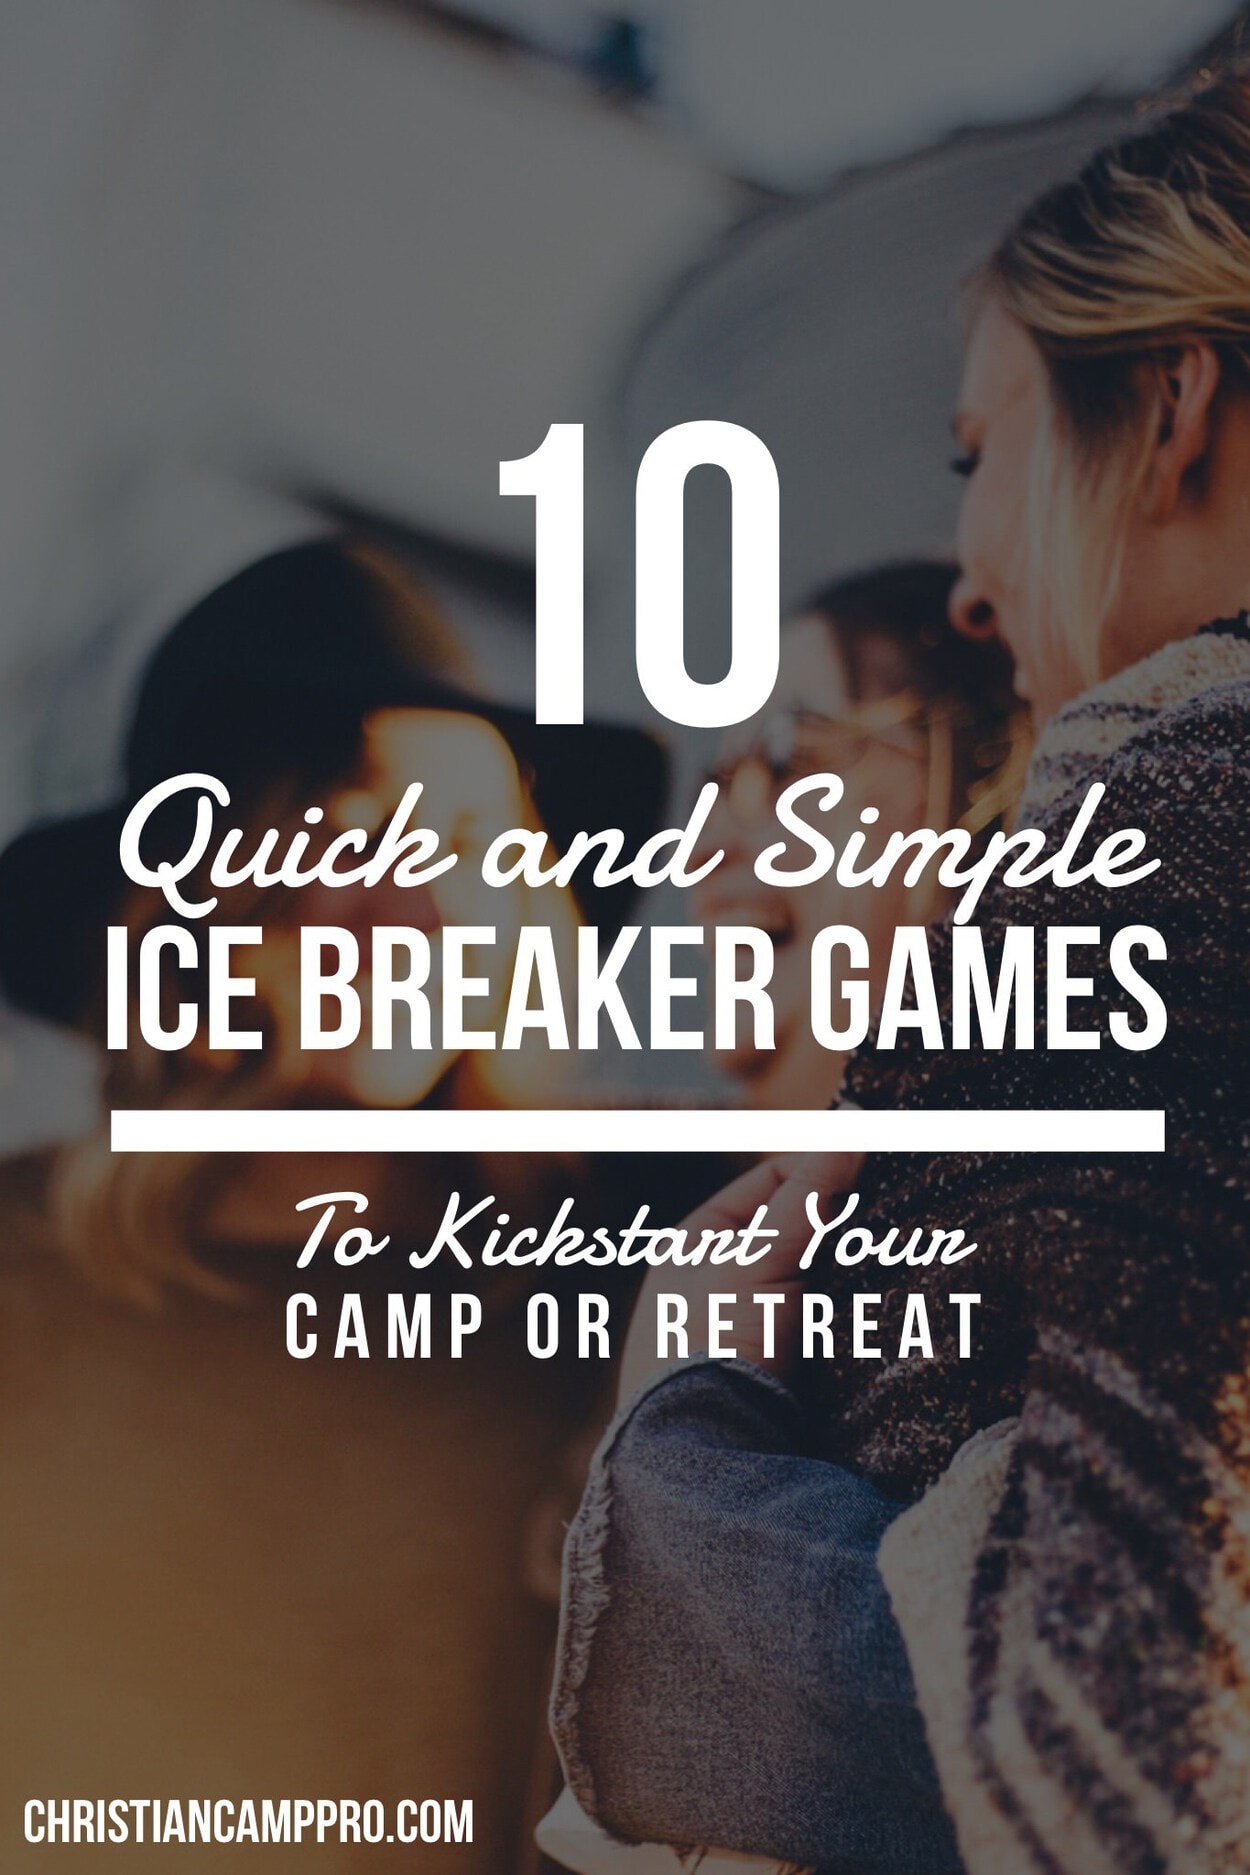 10 Quick and Simple Ice Breaker Games To Kickstart Your Camp or Retreat -  Christian Camp Pro